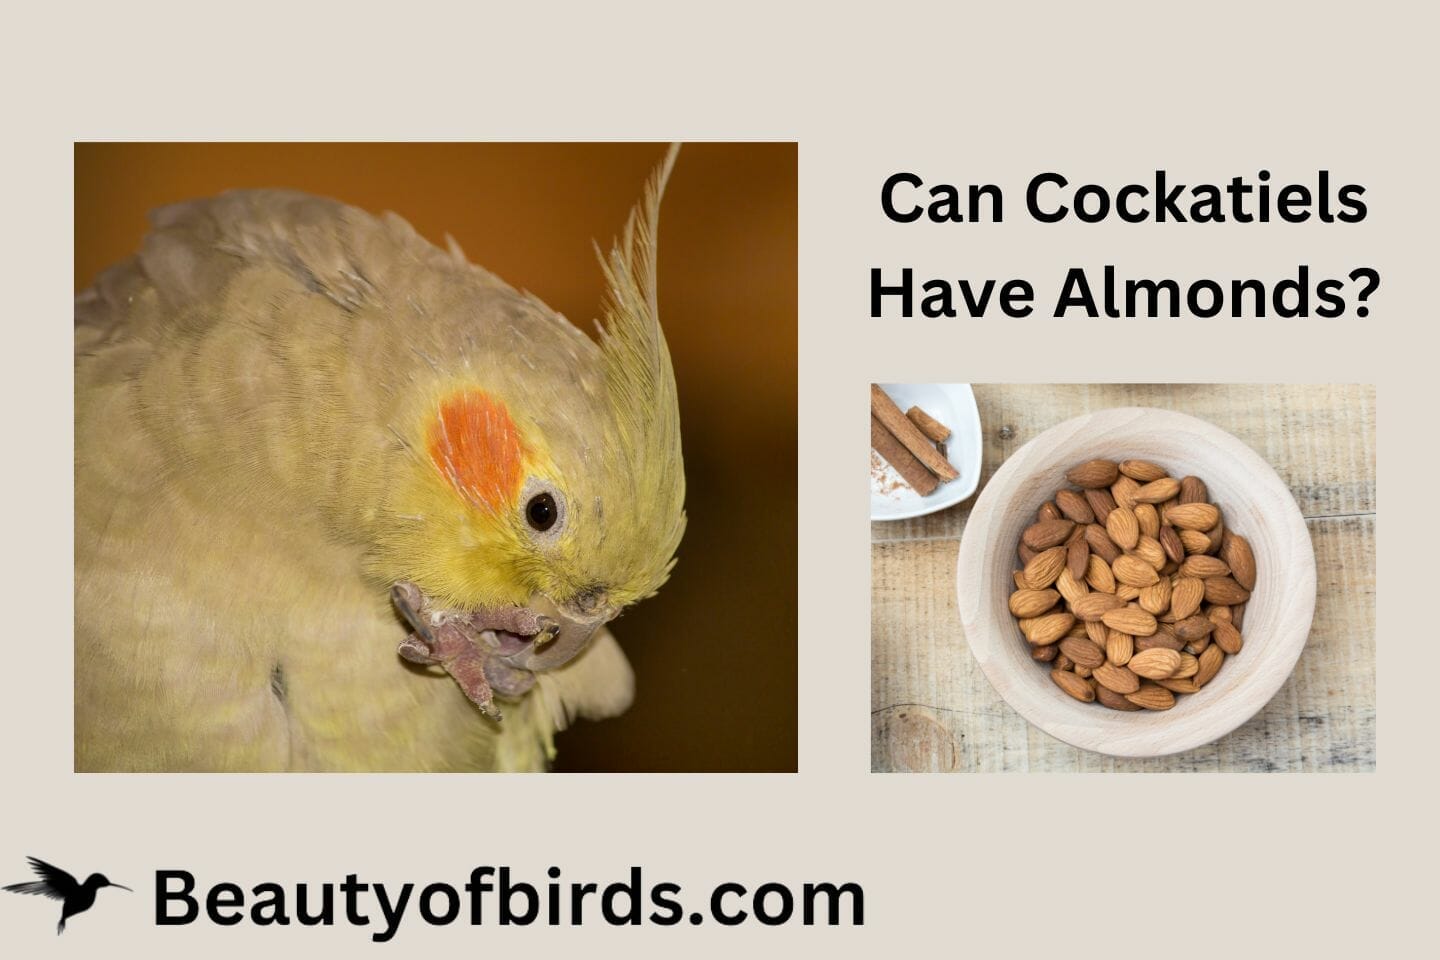 Can Cockatiels Have Almonds